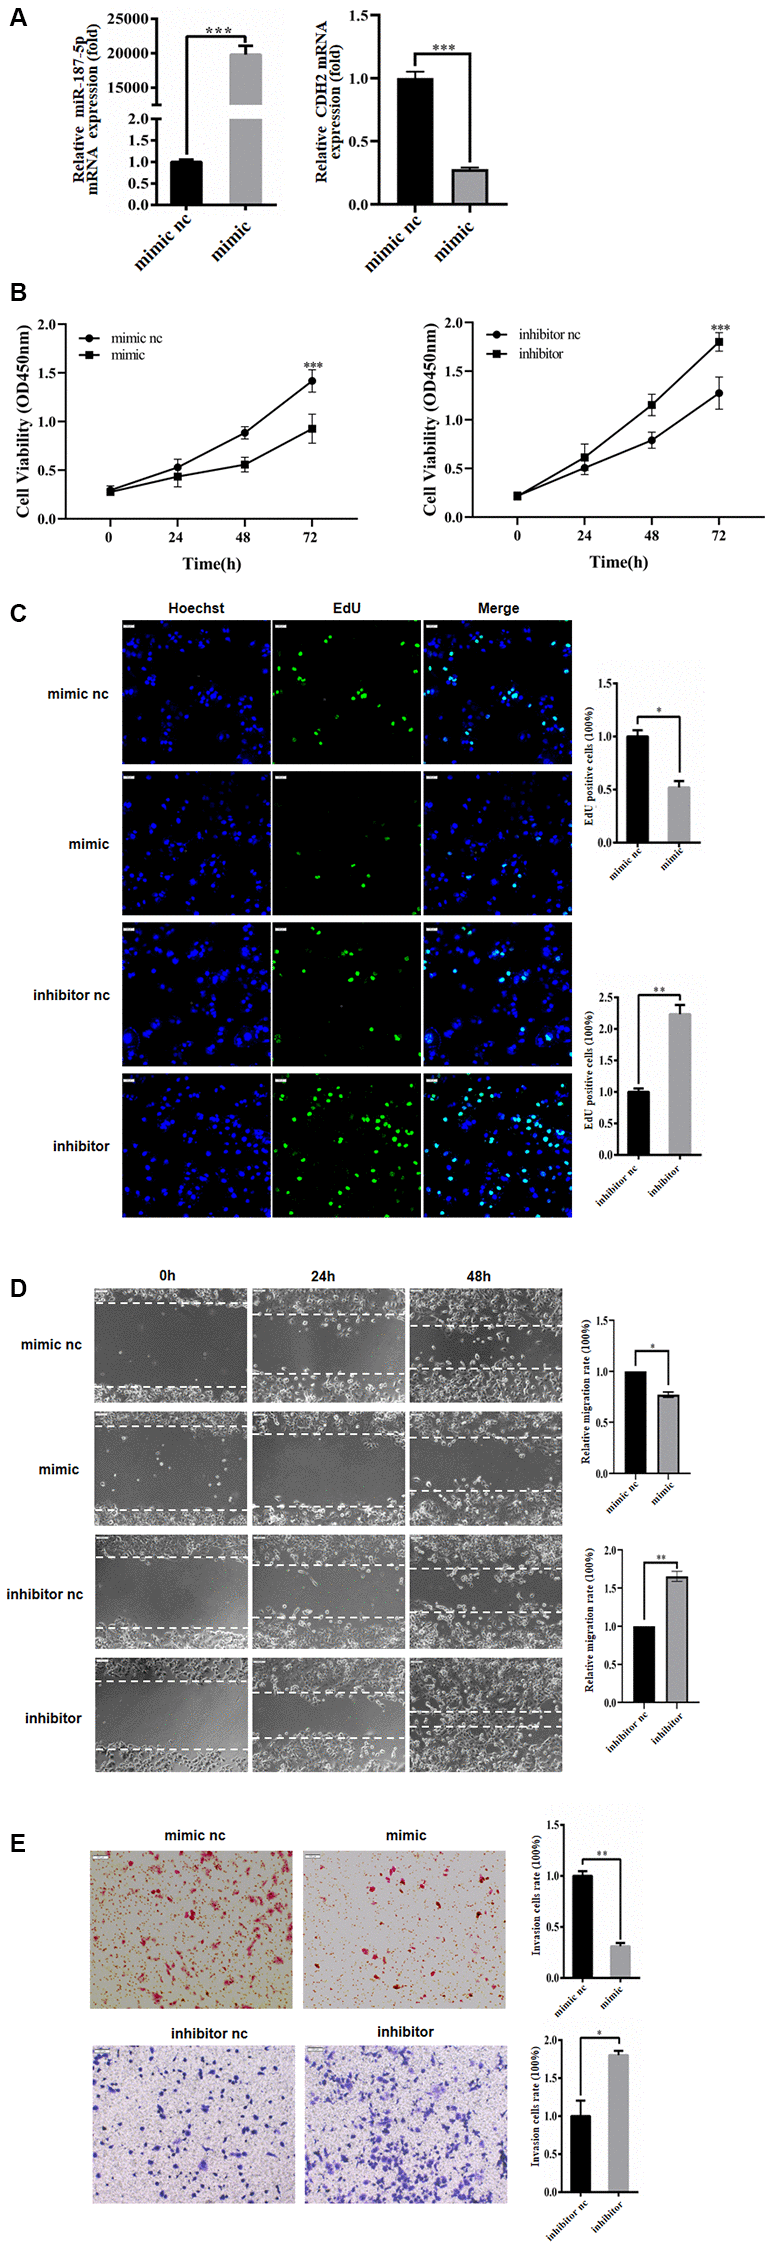 miR-187-5p inhibited proliferation, migration and invasion of hepatoma cells. (A) The transfection efficiency of miR-187-5p mimics and inhibitors was tested by RT-qPCR. (B, C) miR-187-5p mimics inhibited cell proliferation while miR-187-5p promoted cell proliferation by CCK-8 assays and EdU assays. (D, E) The effects of miR-187-5p mimics and inhibitors on migration and invasion of Huh-7 cell by Wound-healing and Transwell assays. The experiments were repeated at least 3 independent times. (B–E) Data was presented as mean ± SD from three independent experiments. *p **p ***p 